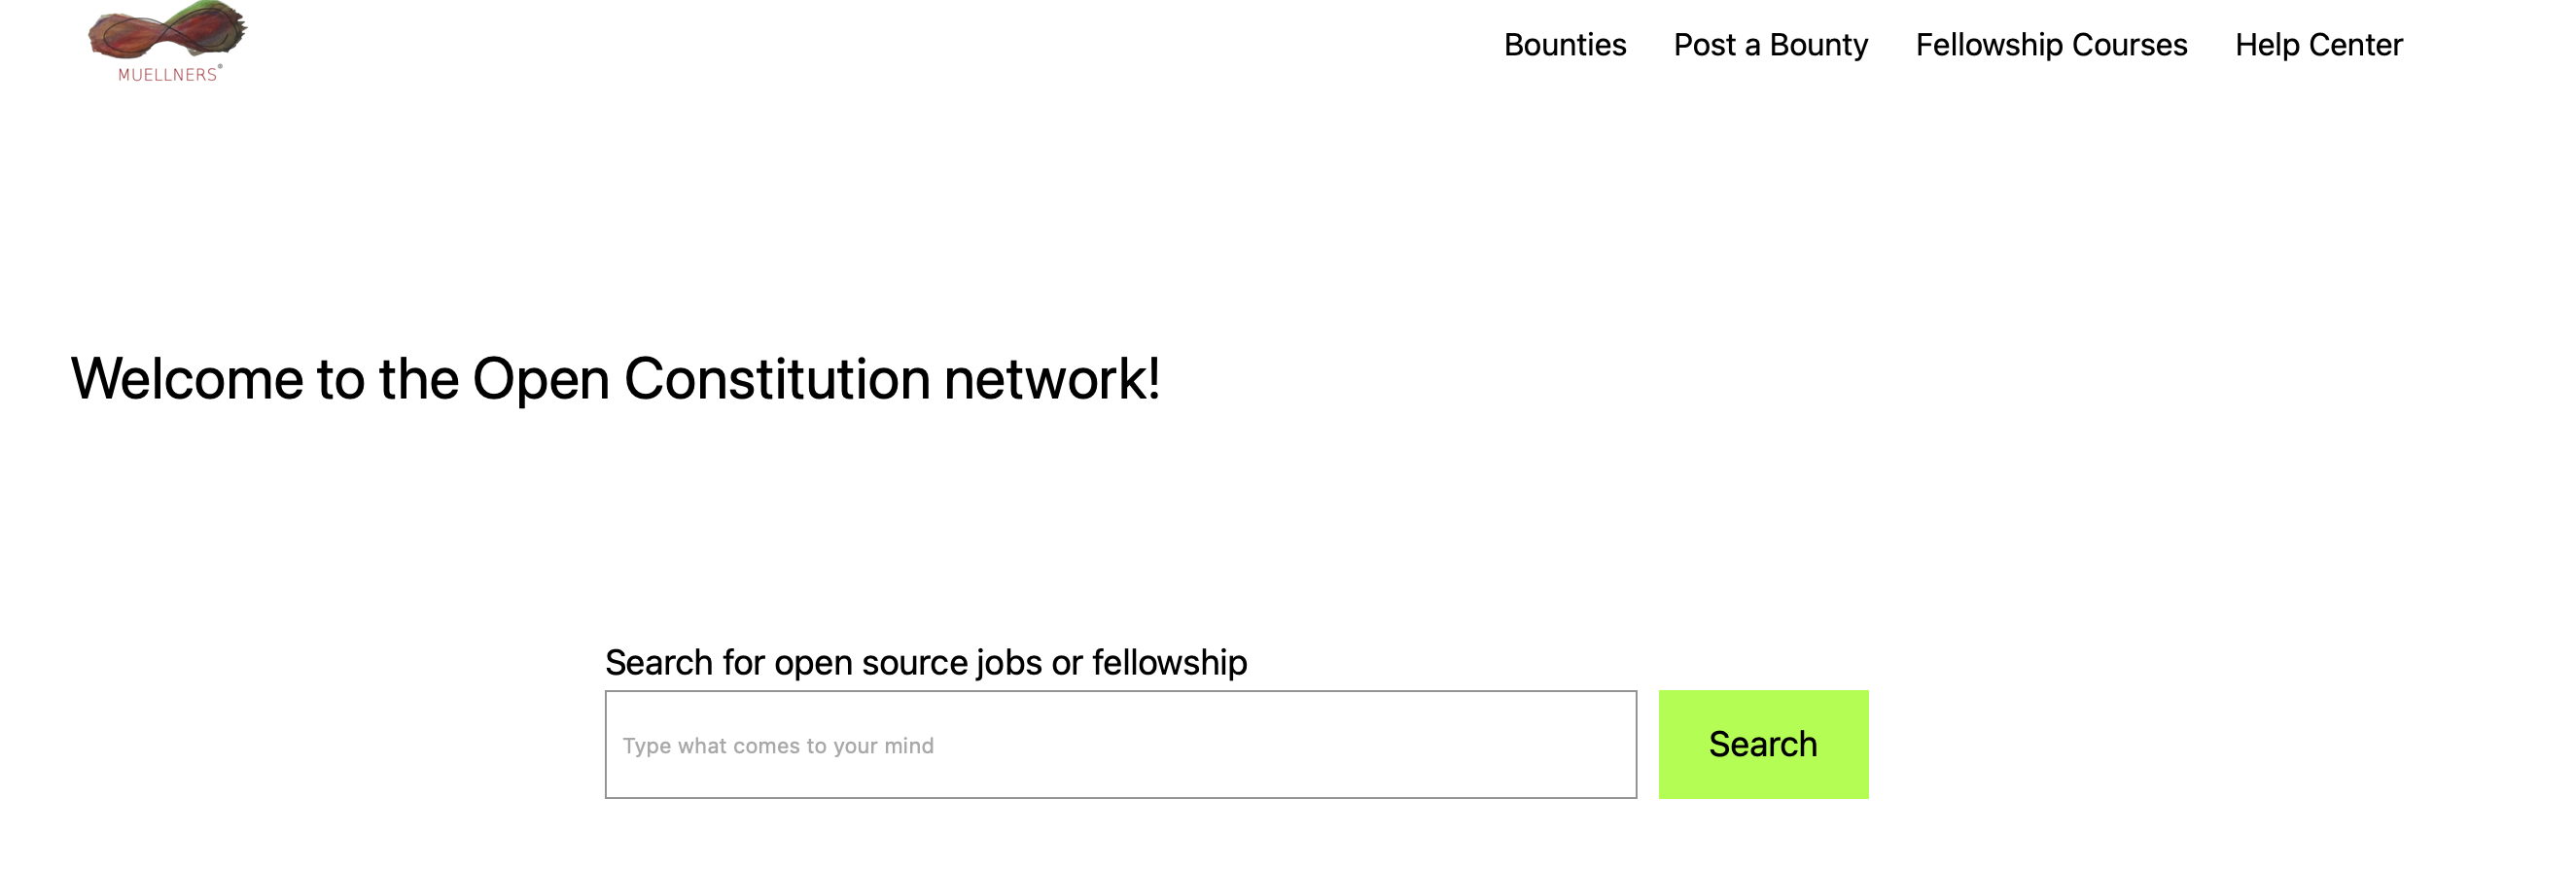 Open Bounty, a platform for open source fellowships and jobs